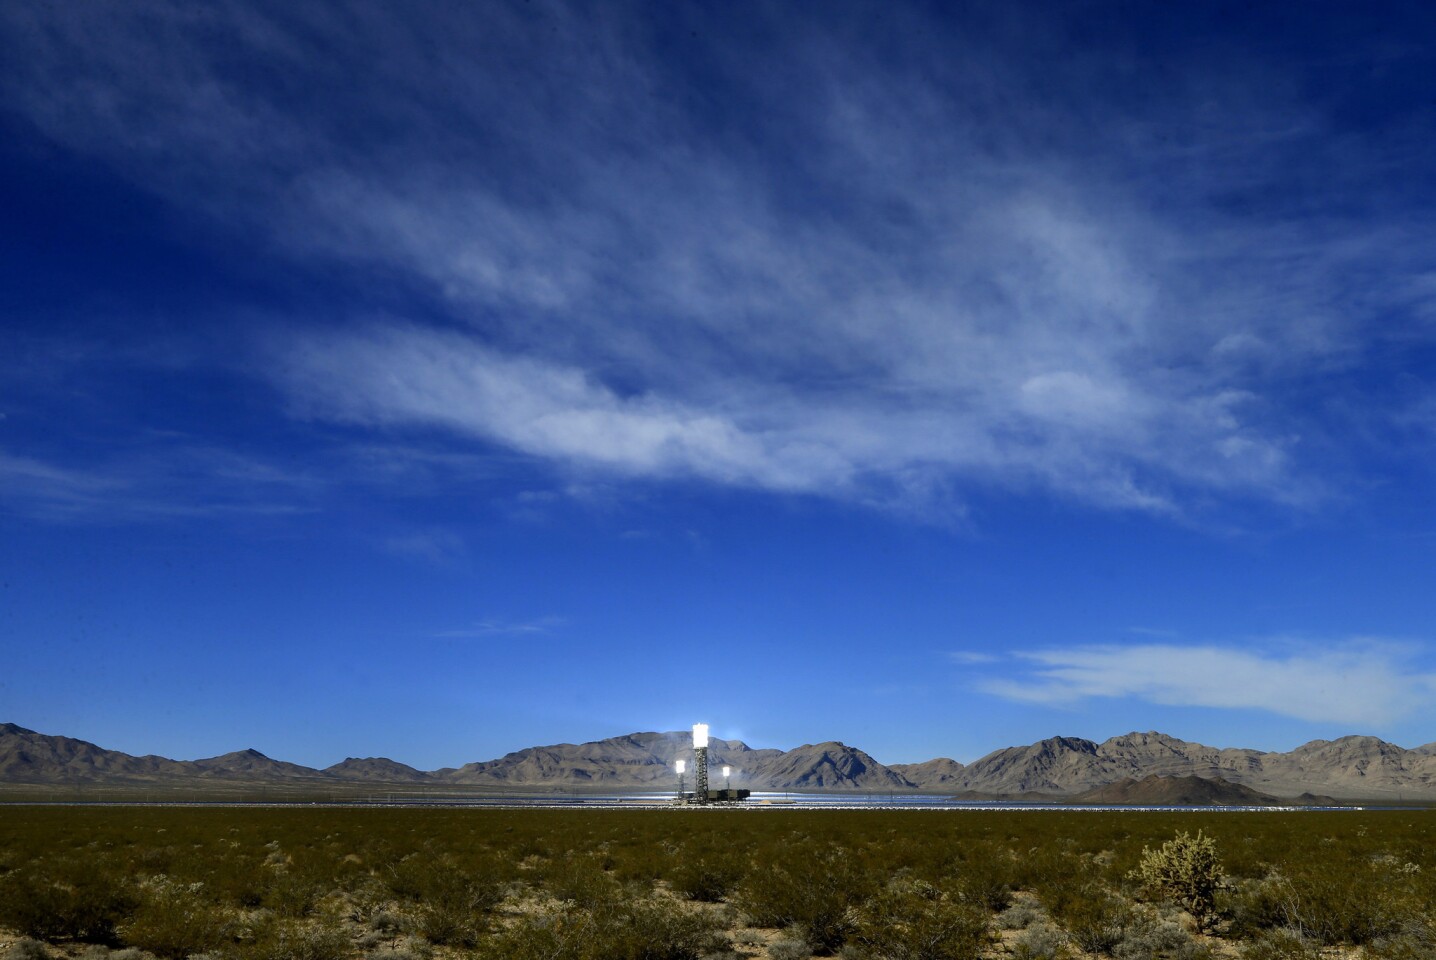 The glowing towers at the Ivanpah Solar Electric Generating System are proof that the plant is online and generating power.